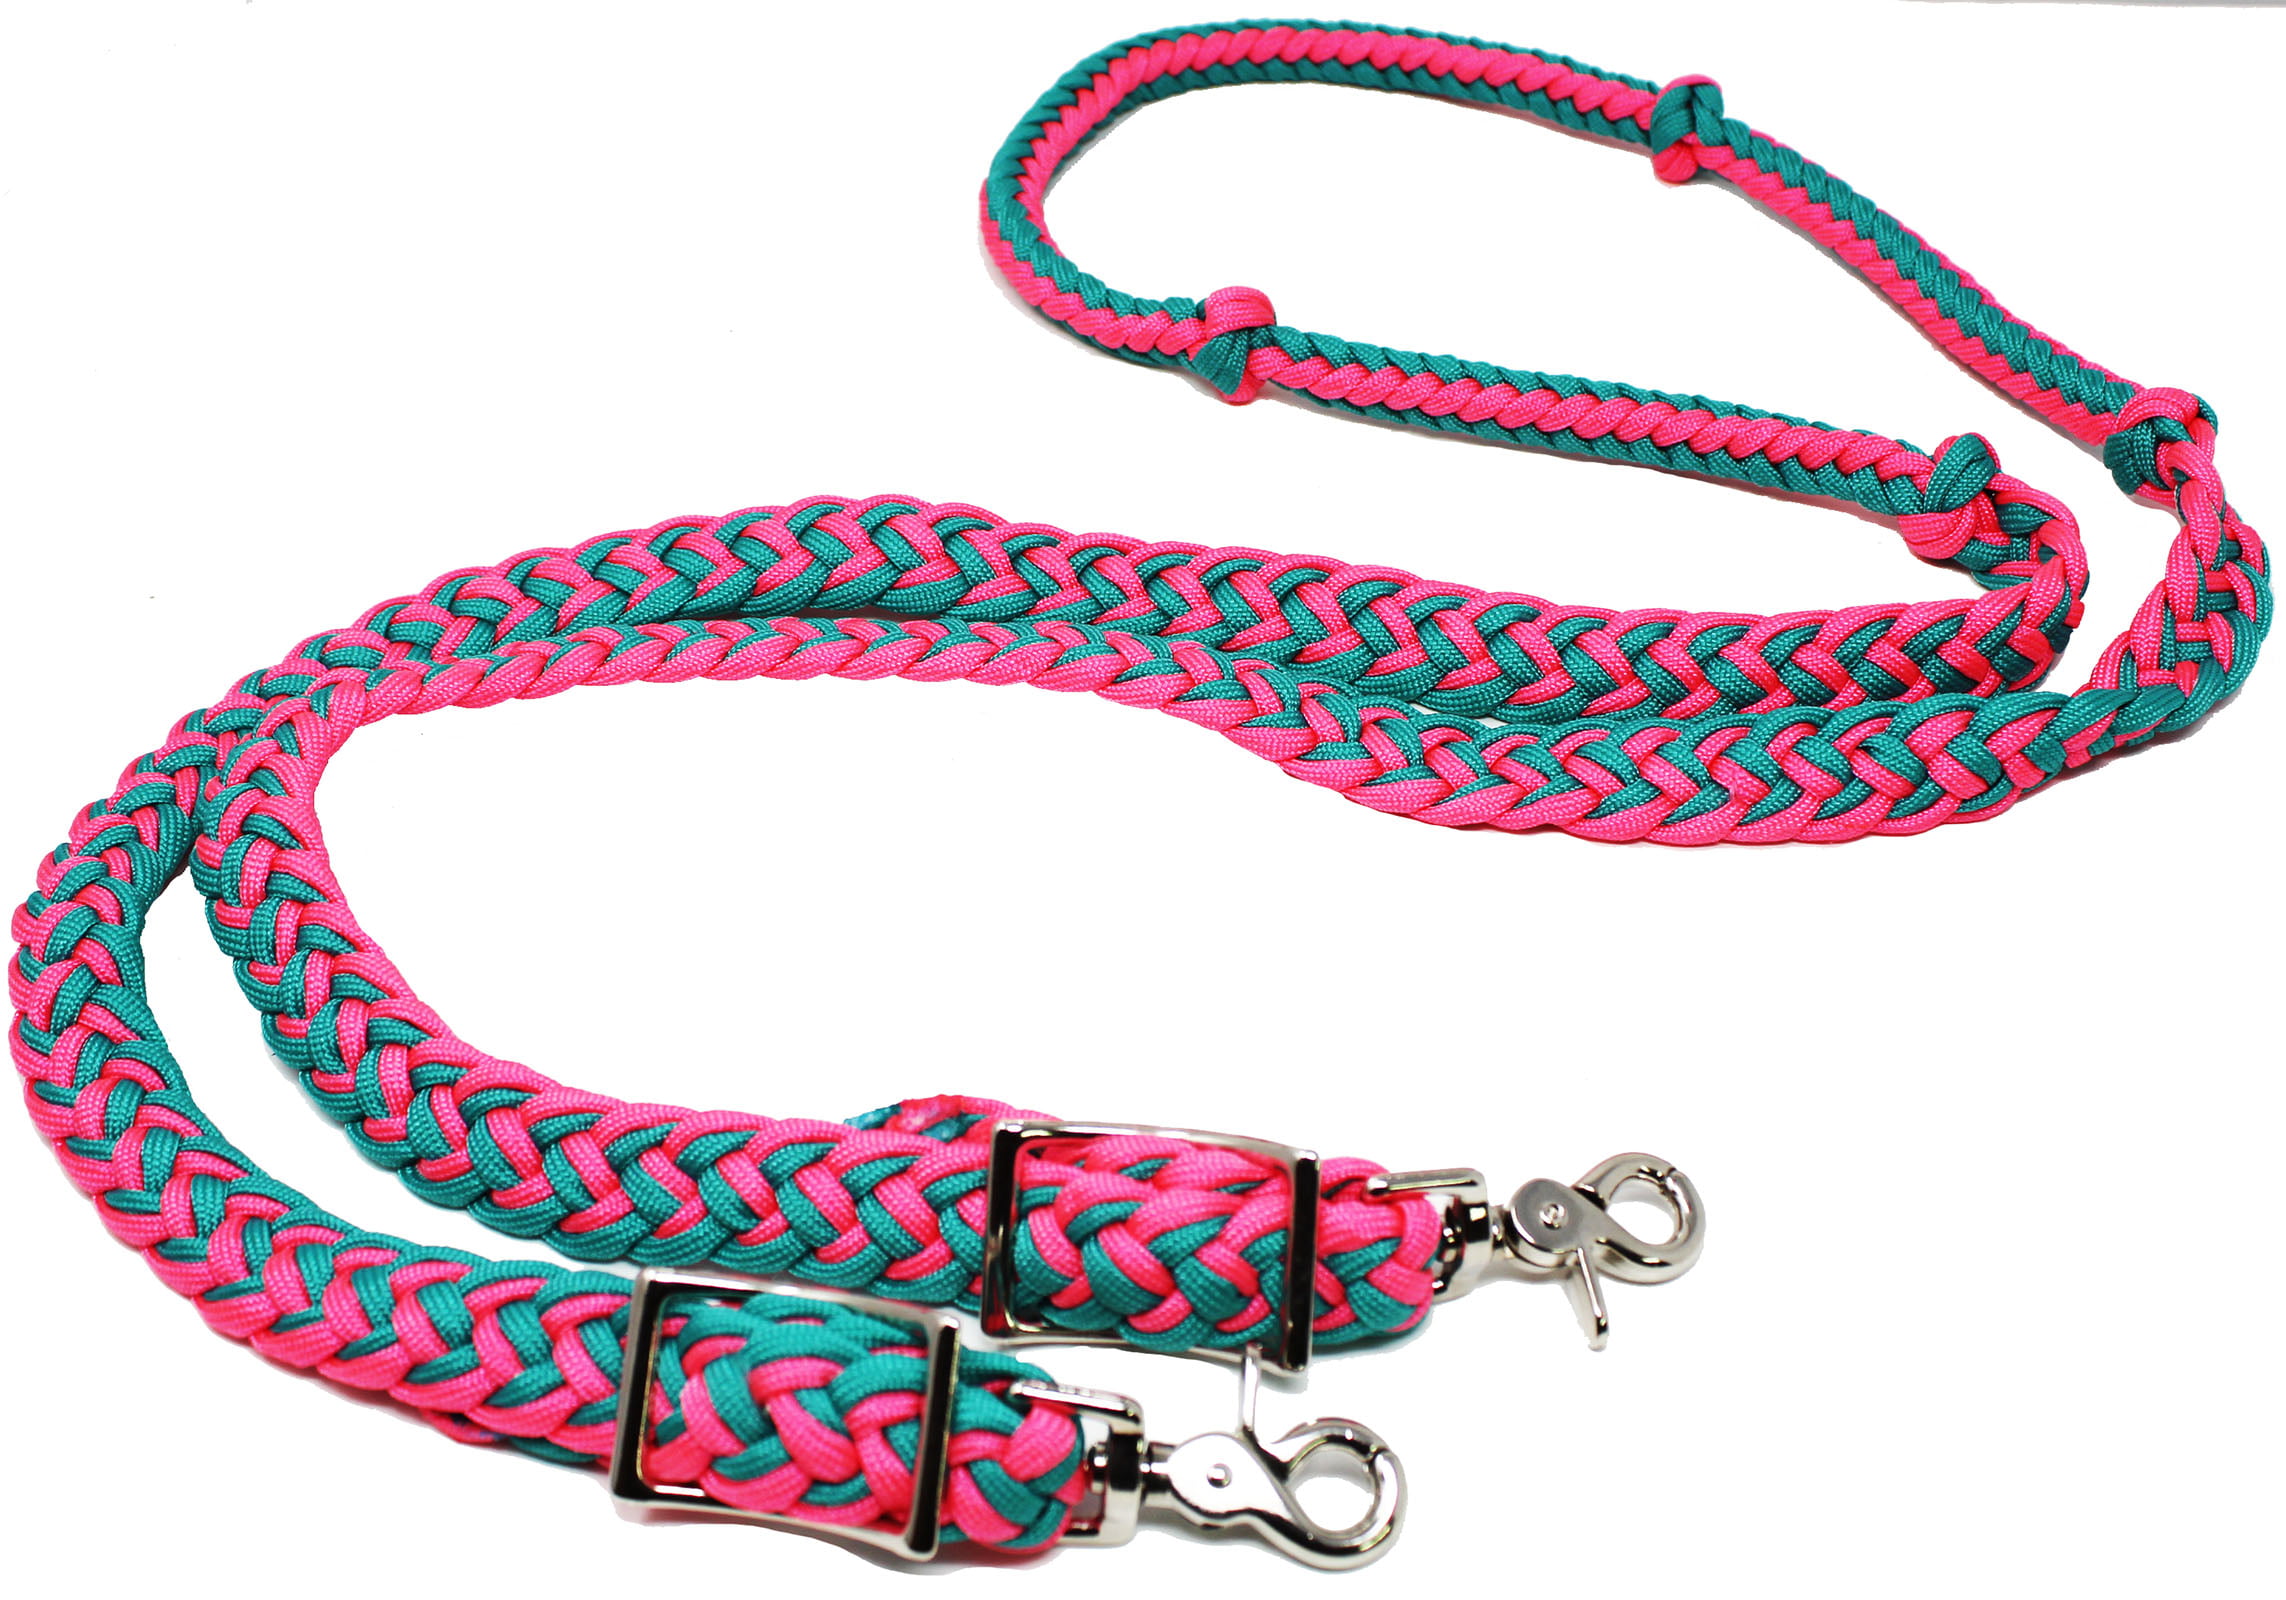 Roping Knotted Horse Tack Western Barrel Reins Nylon Braided Turquoise 607476 